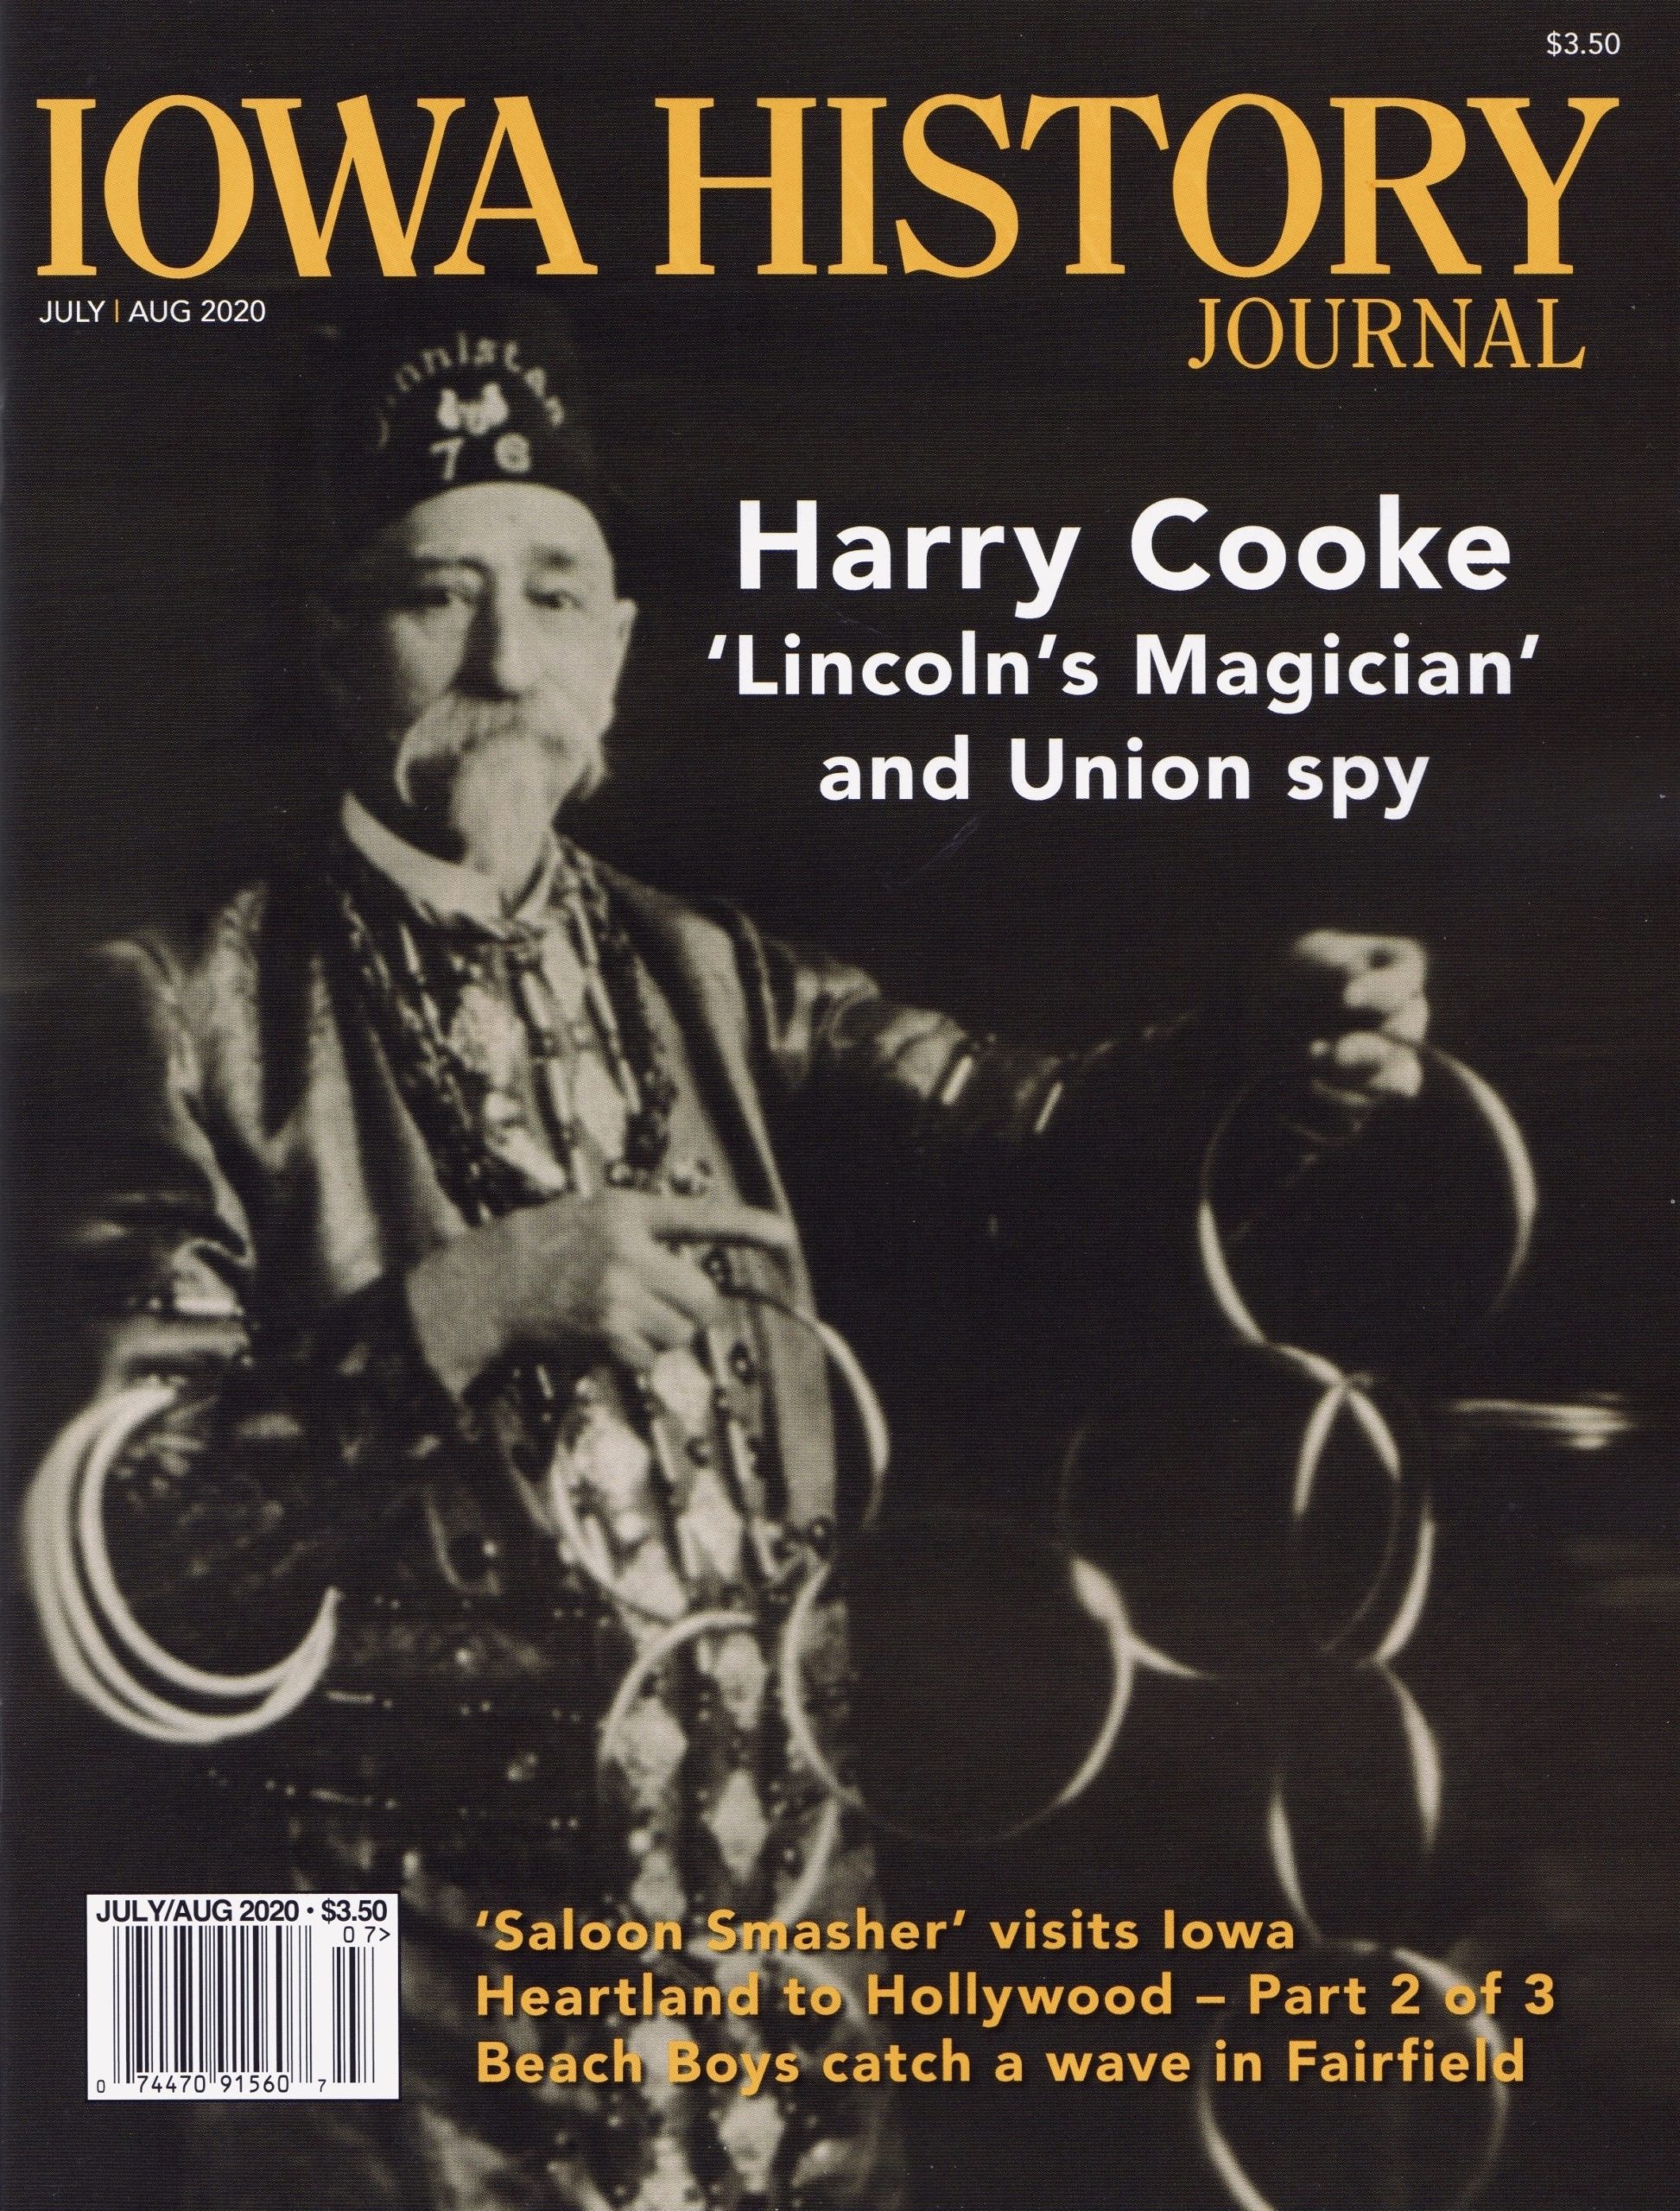 Volume 12, Issue 4 - Harry Cooke 'Lincoln's Magician' 